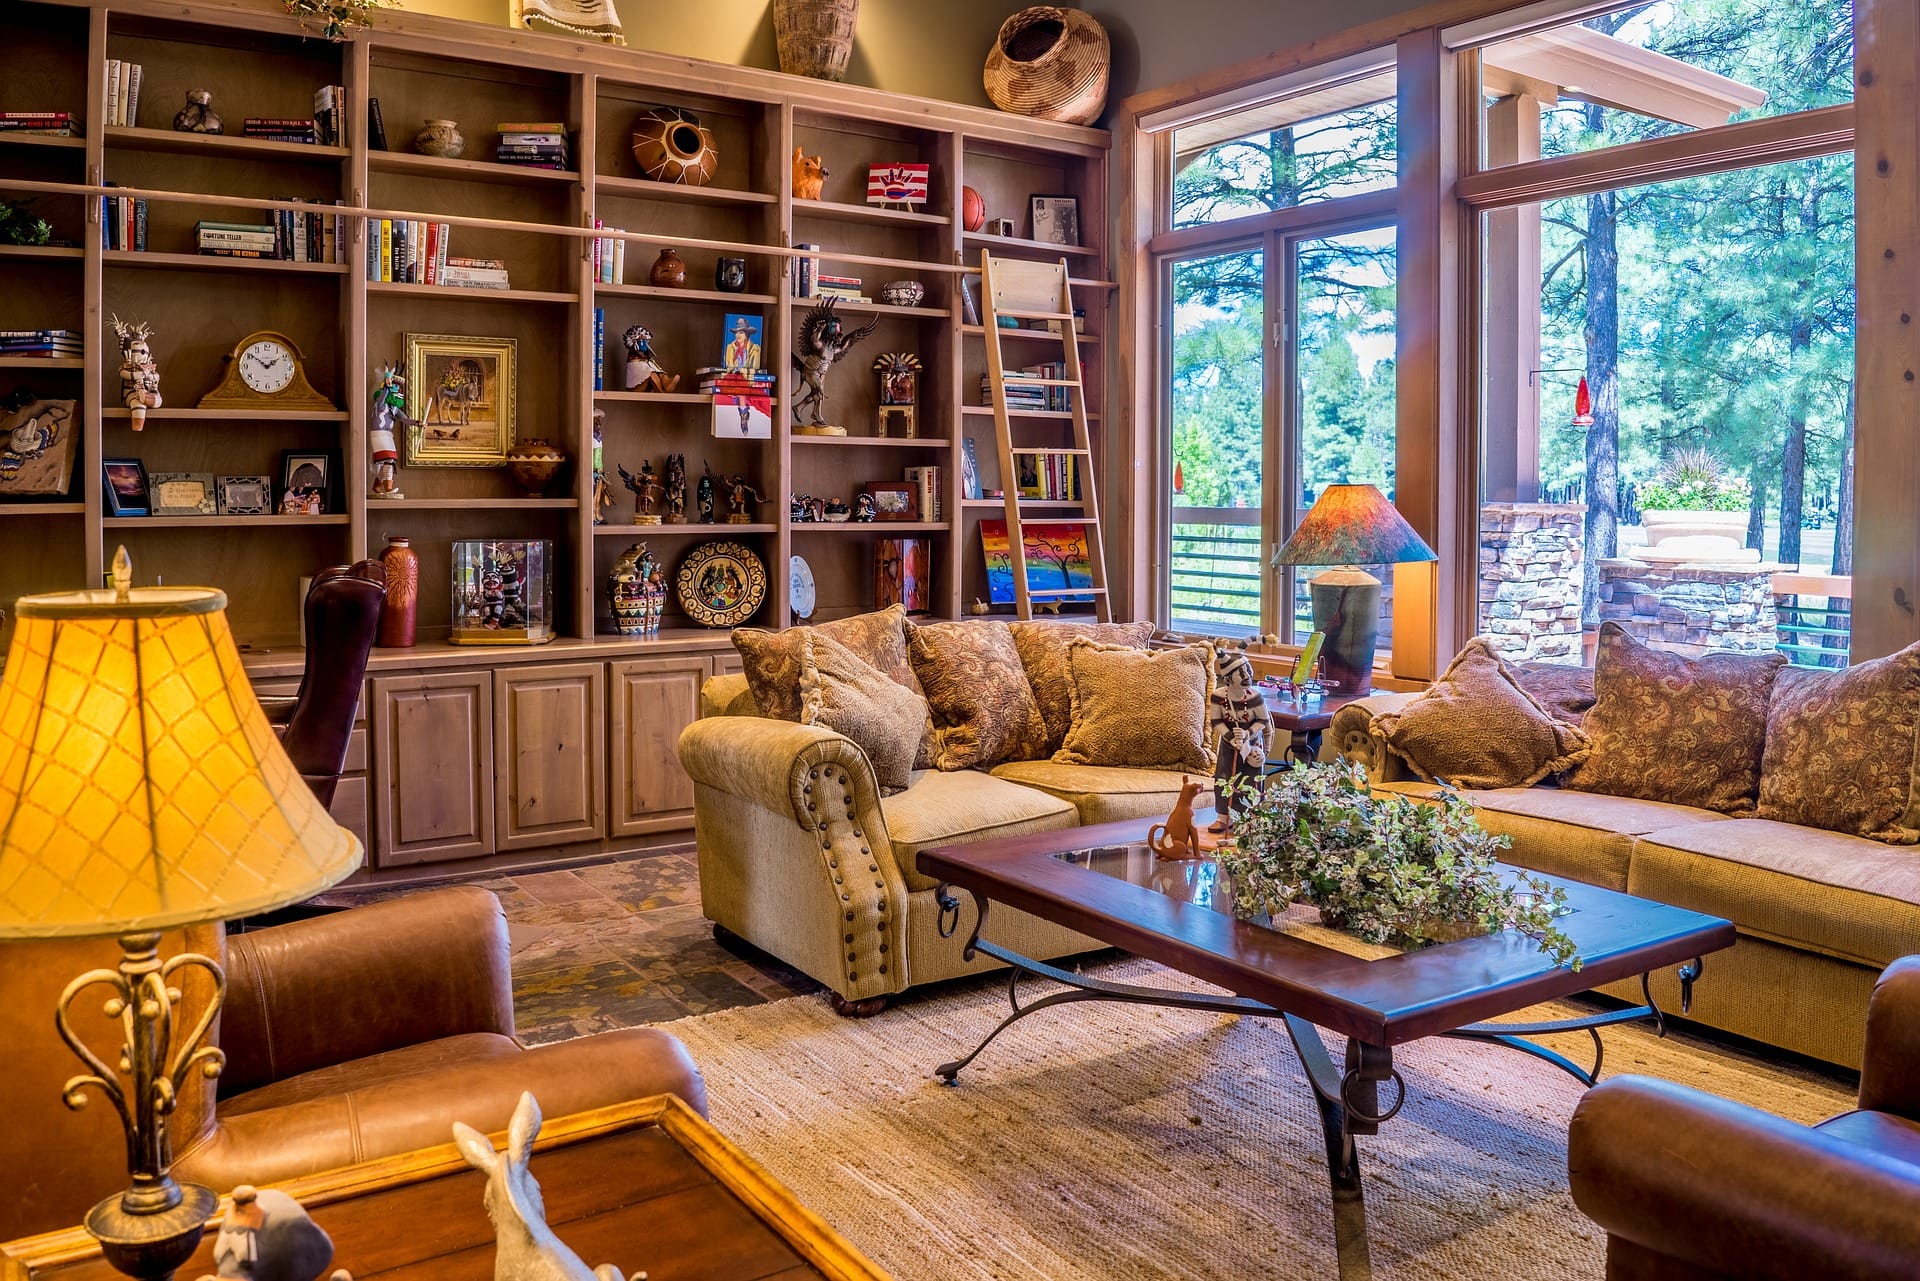 A cozy living room with a large bookshelf